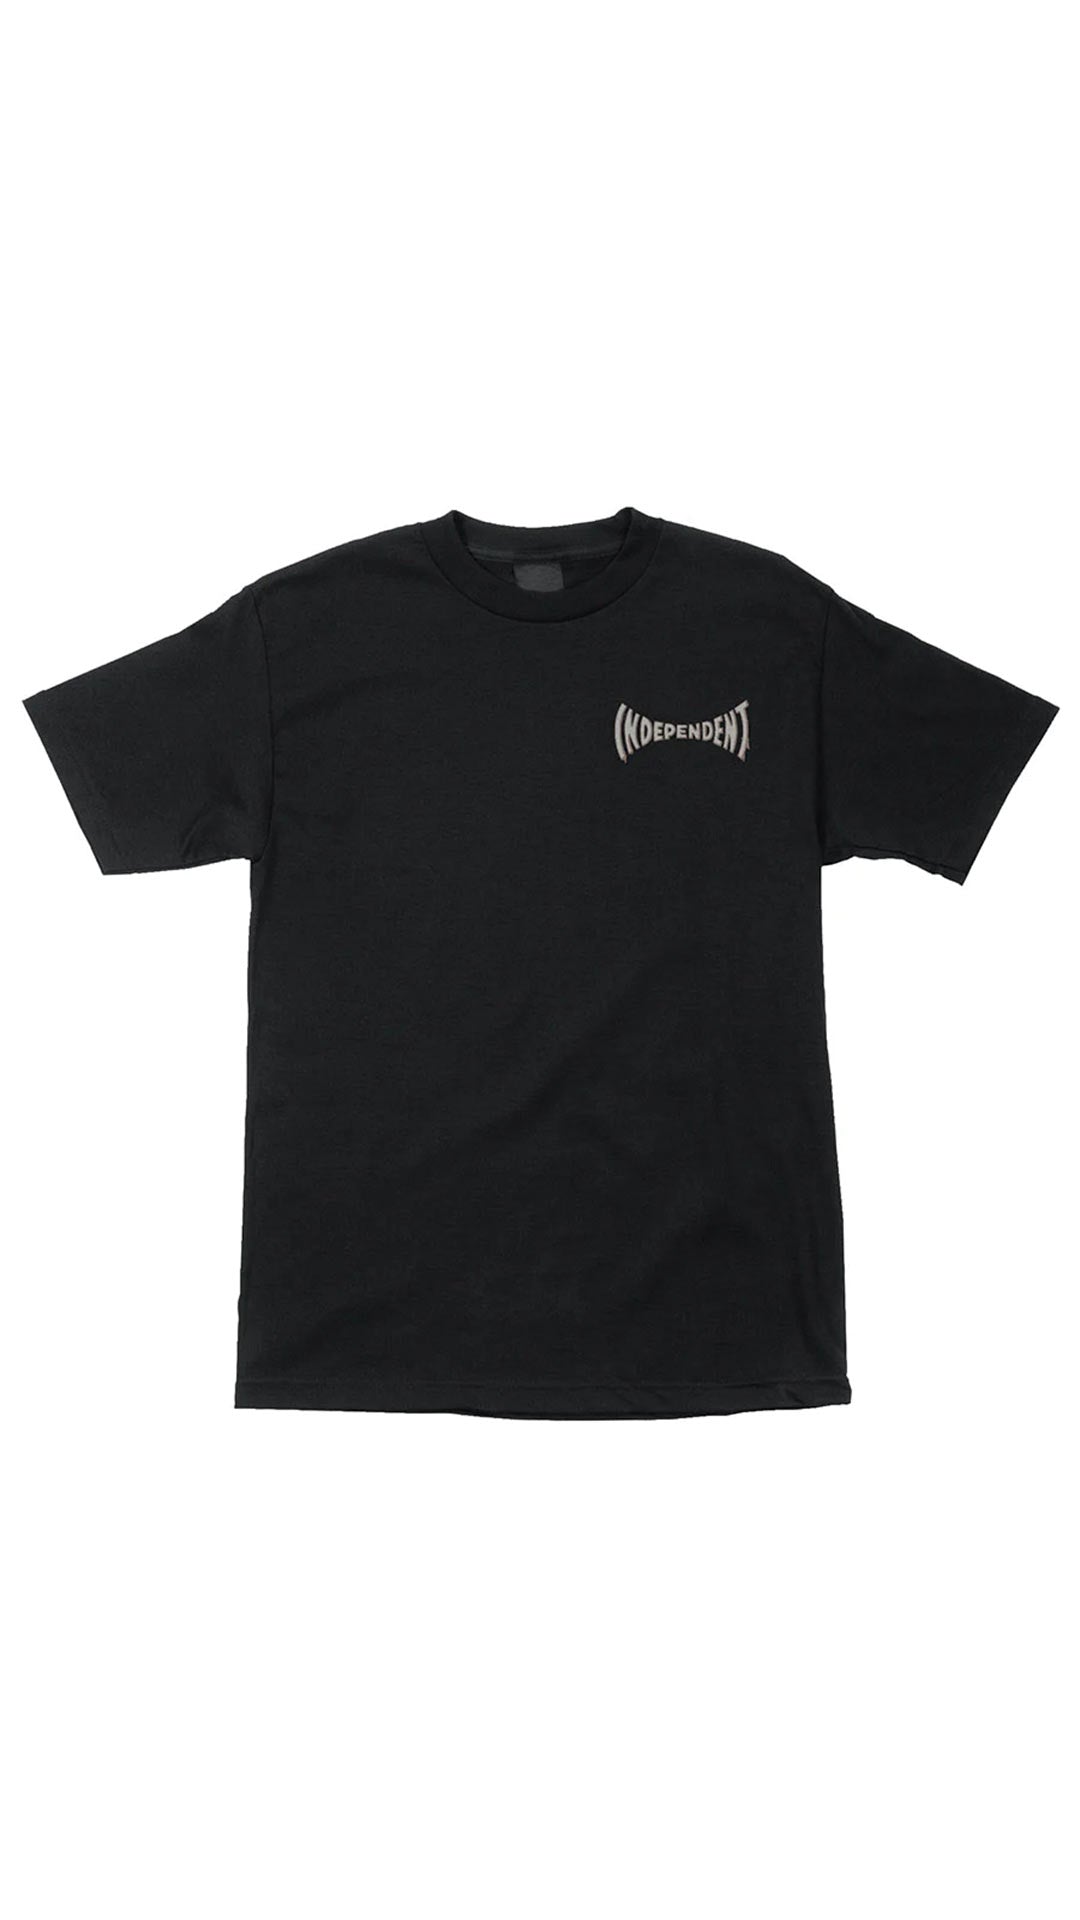 Independent Tee Built to Grind Black T-shirt - Camiseta Ropa Independent 